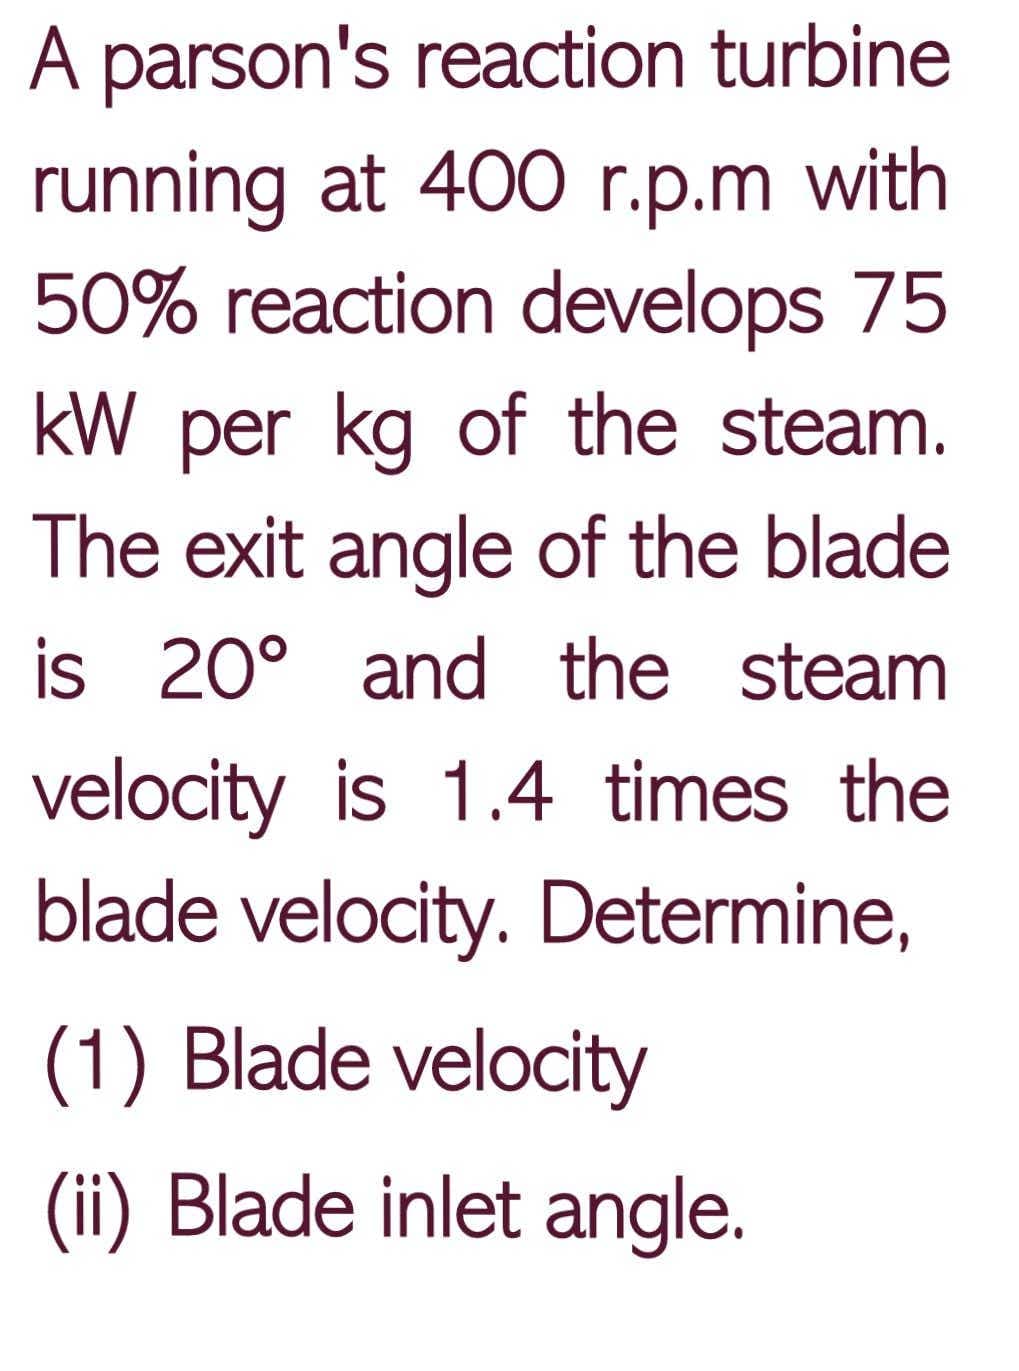 A parson's reaction turbine
running at 400 r.p.m with
50% reaction develops 75
kW per kg of the steam.
The exit angle of the blade
is 20° and the steam
velocity is 1.4 times the
blade velocity. Determine,
(1) Blade velocity
(ii) Blade inlet angle.
